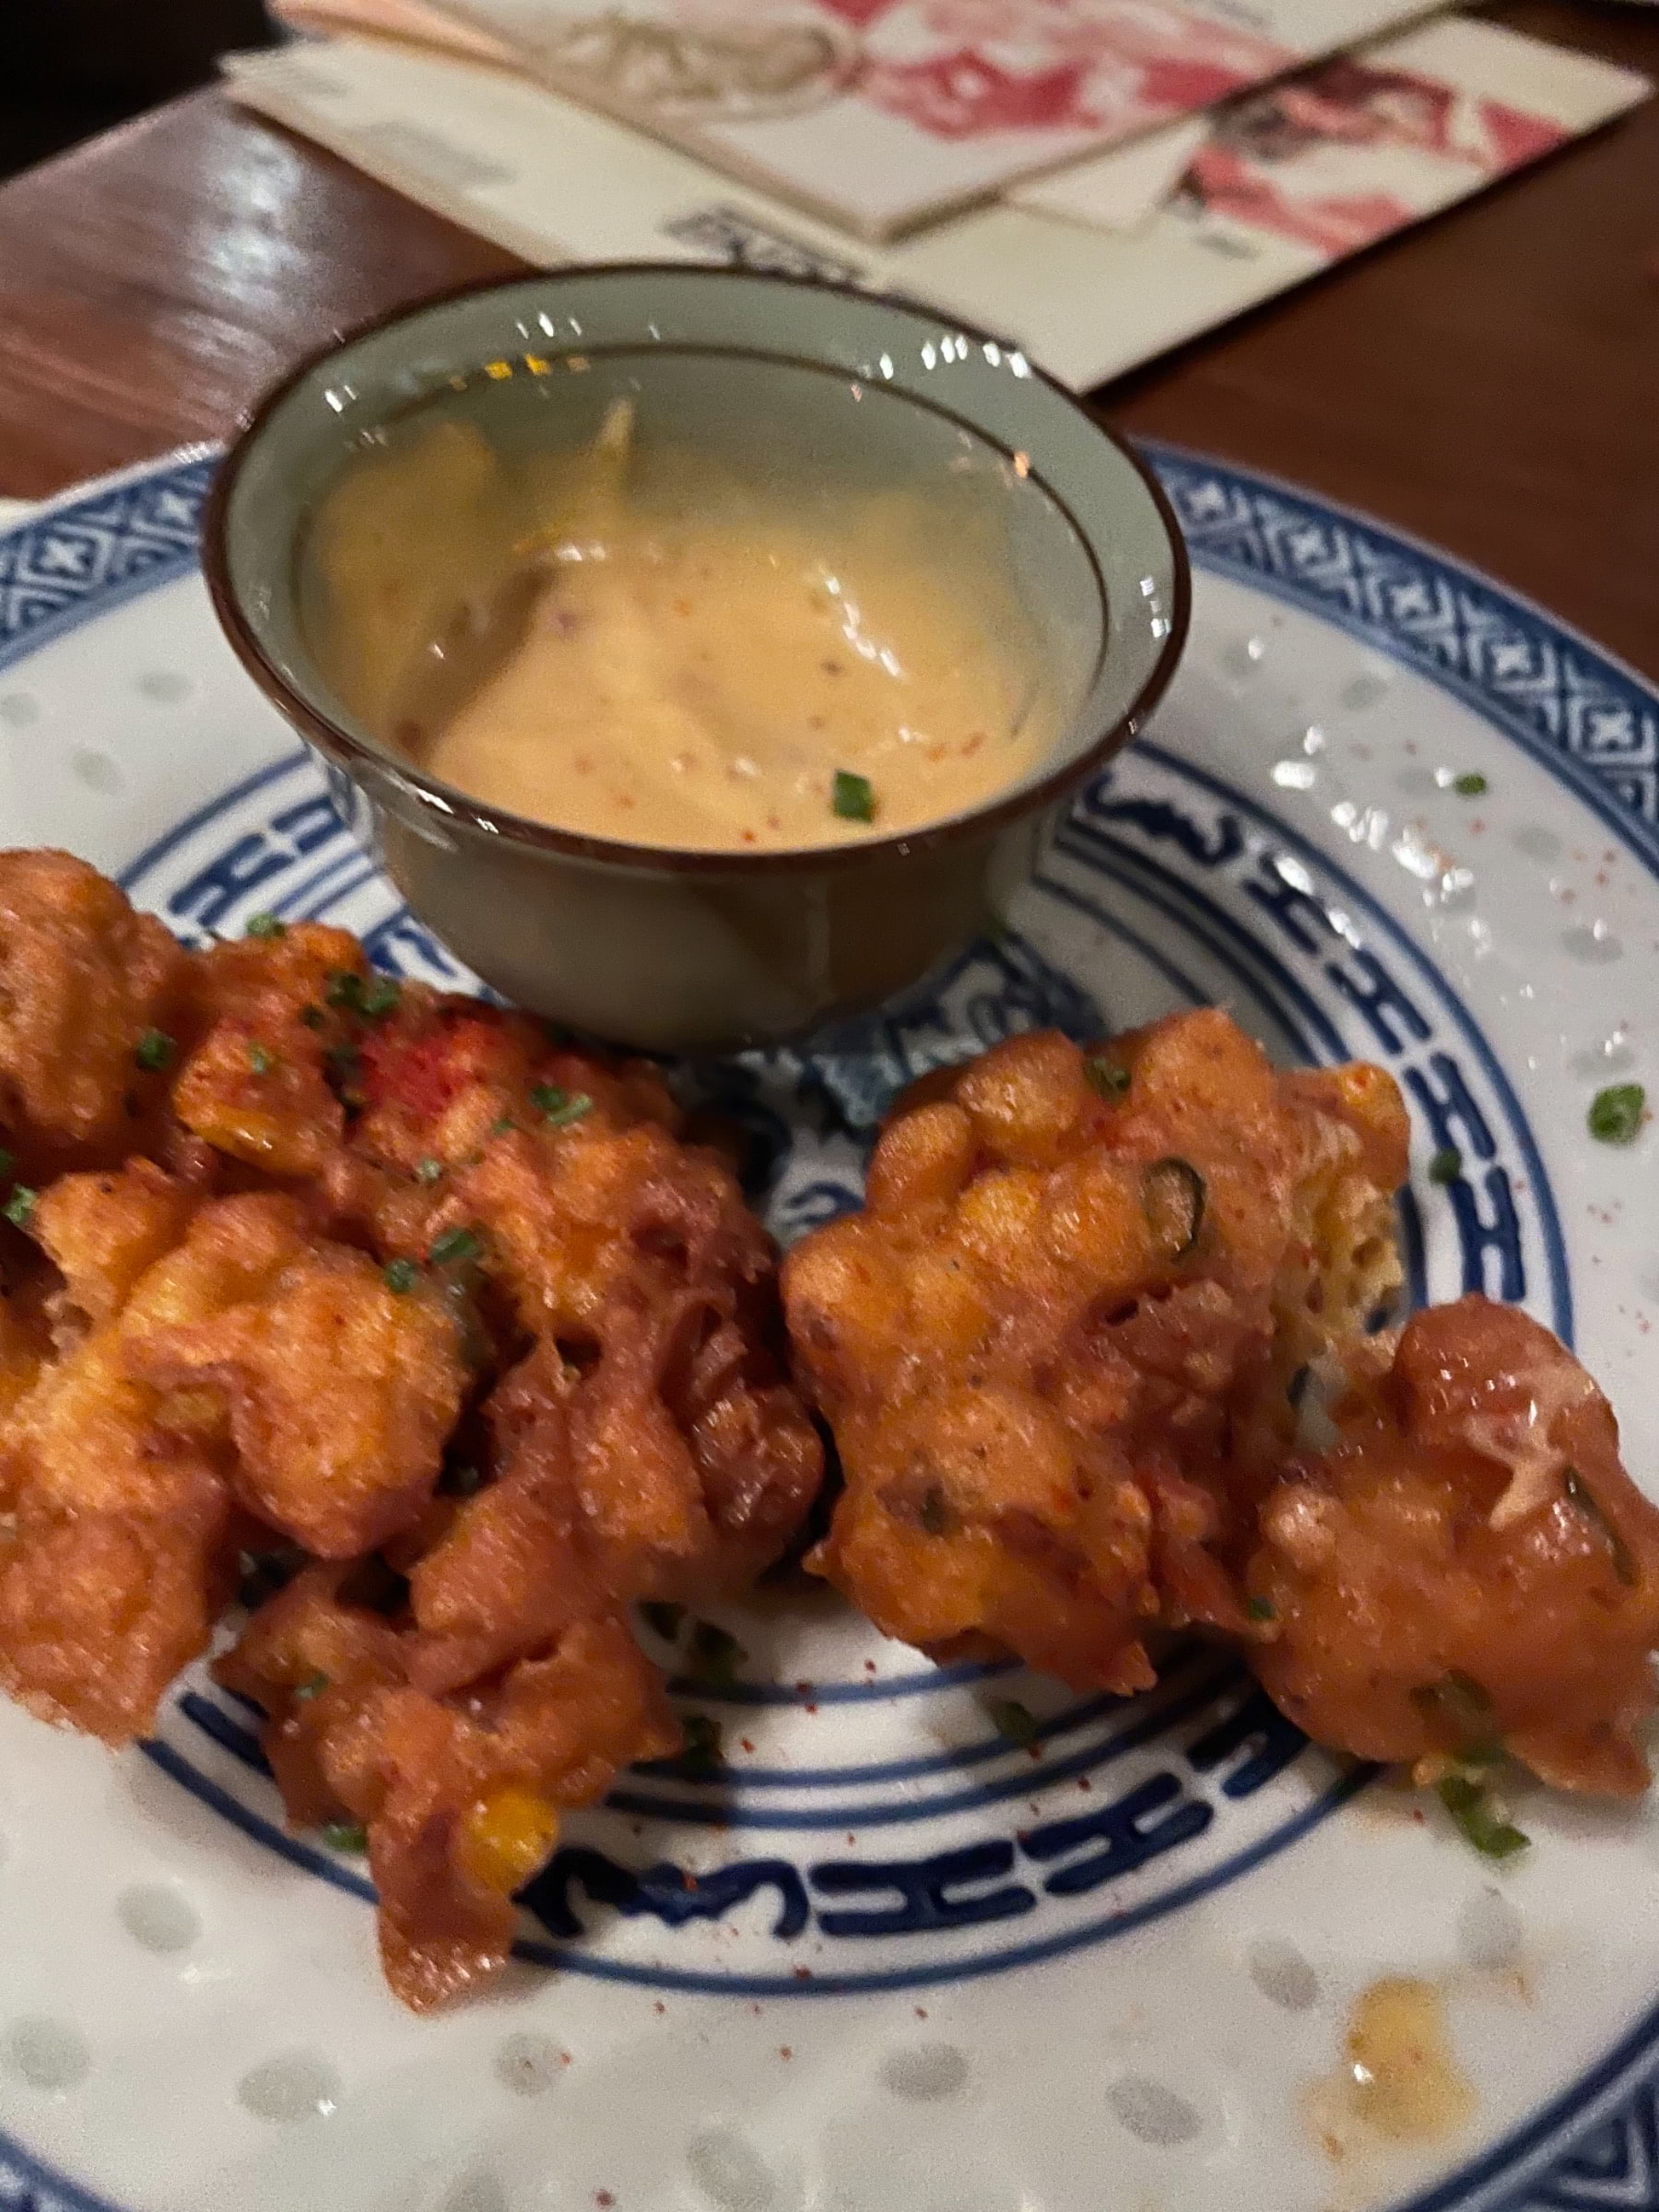 Corn poppers – Photo from Ling Long by Denny S. (17/11/2021)